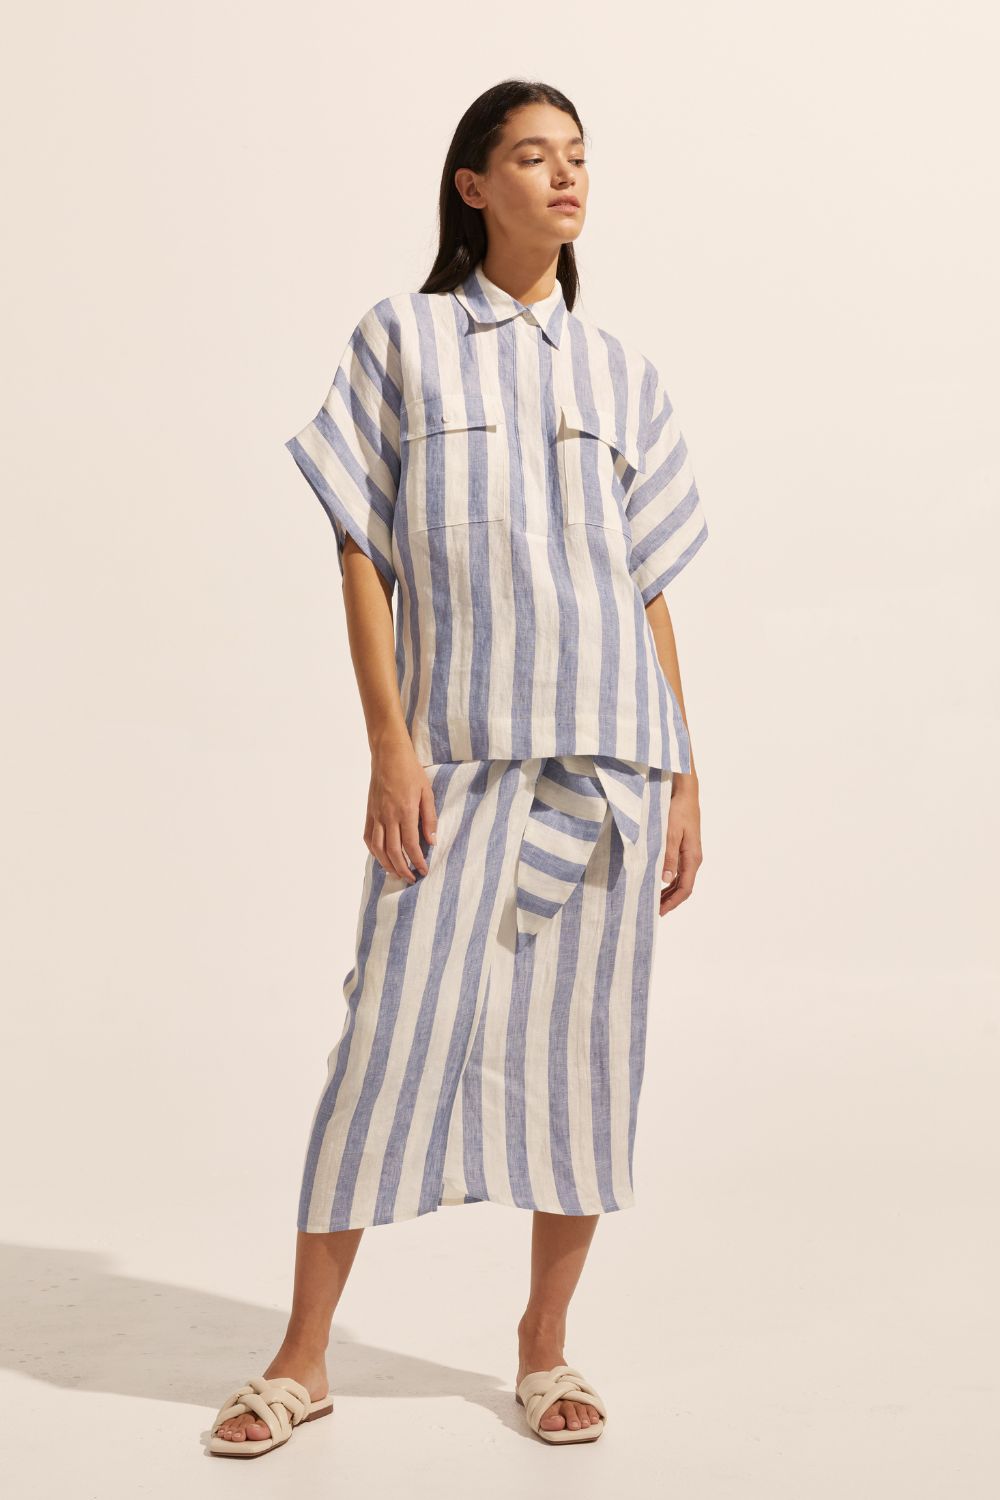 blue and white stripe, shirt, oversized pockets, short sleeve, linen, front view